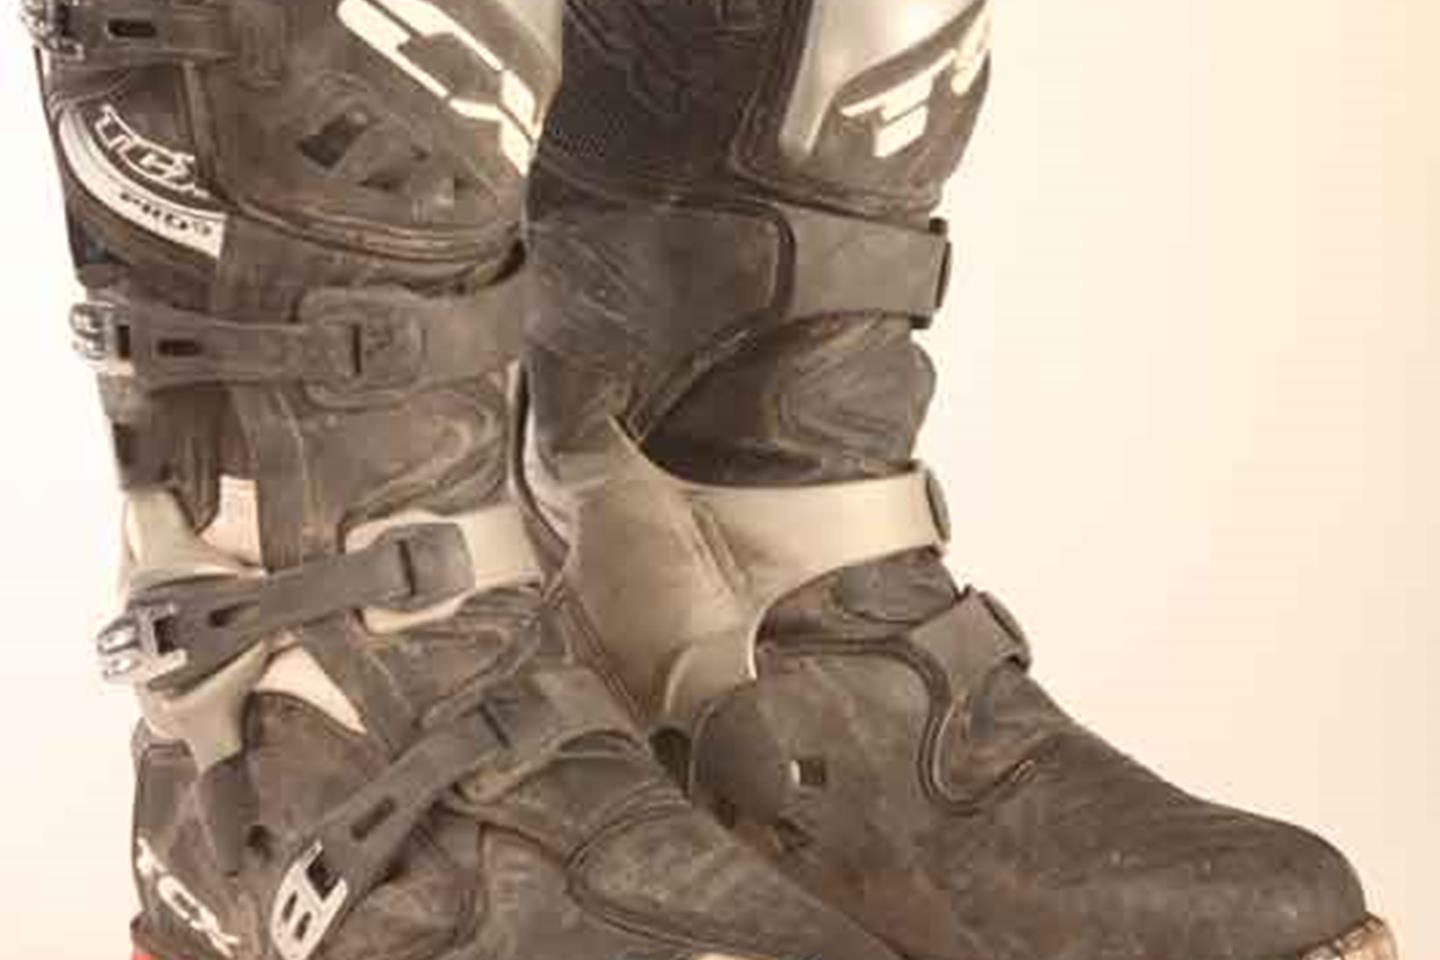 Boot review: TCX Comp 2 boots | MCN